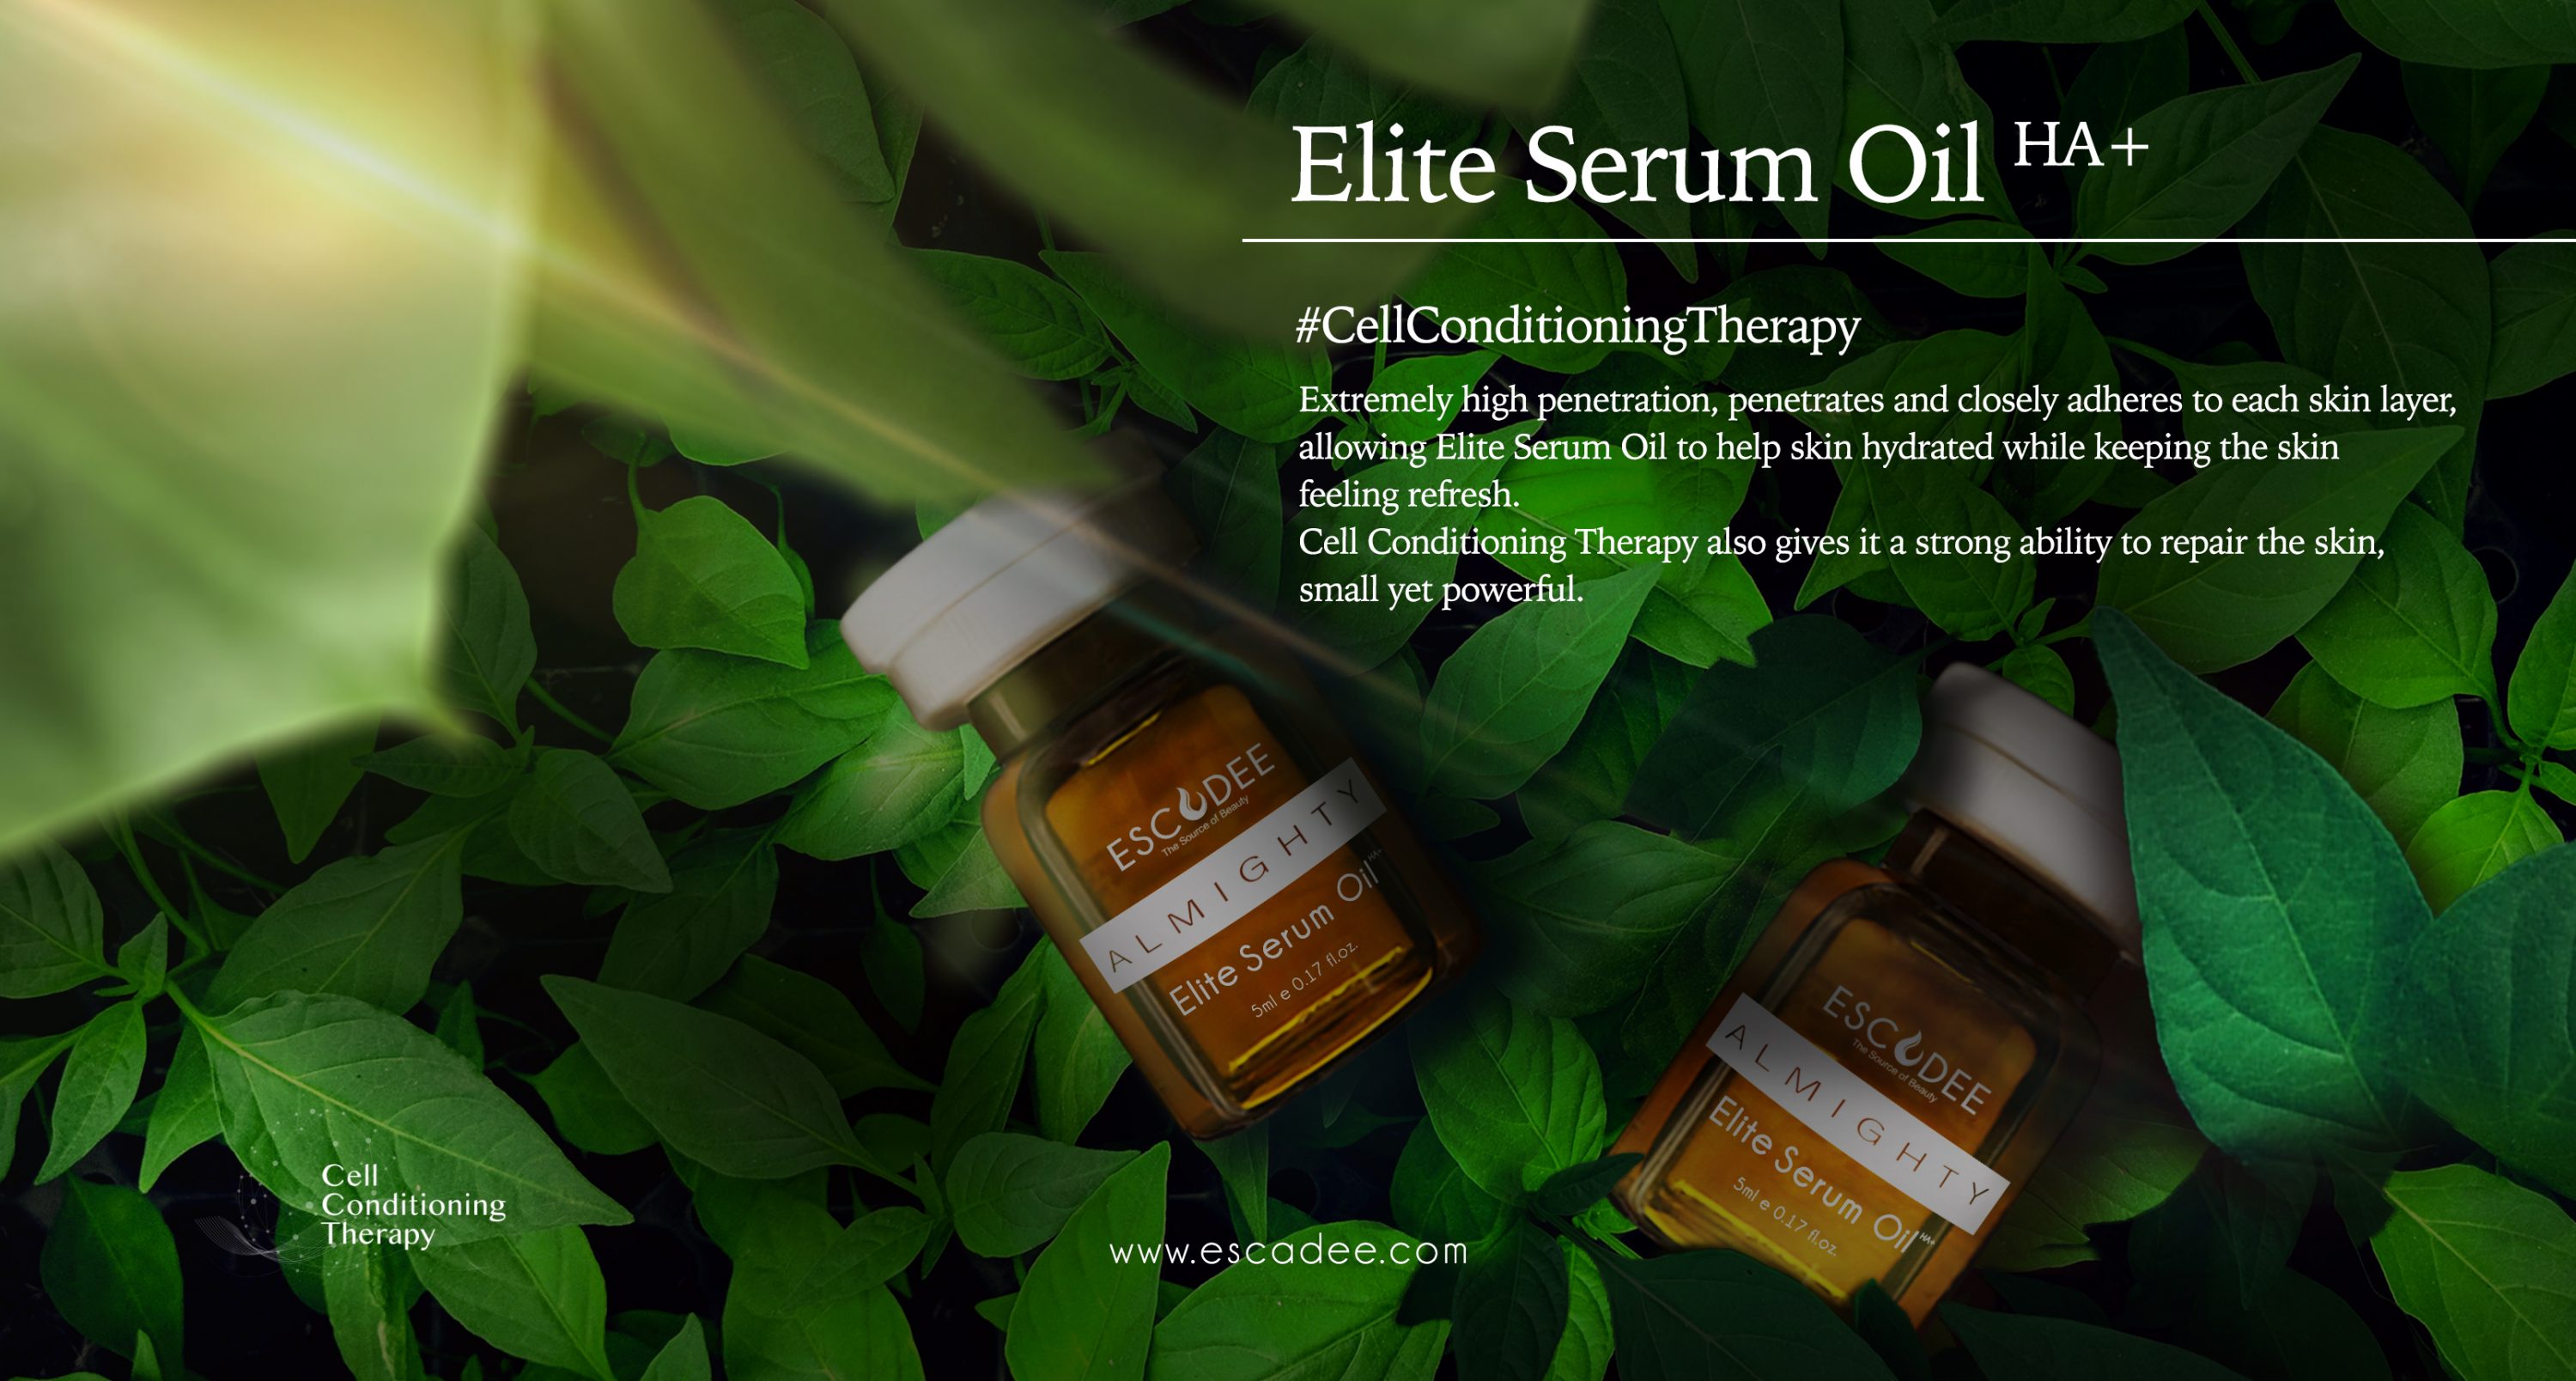 Escadee Elite Serum Oil_Almighty Series_Cell Conditioning Therapy